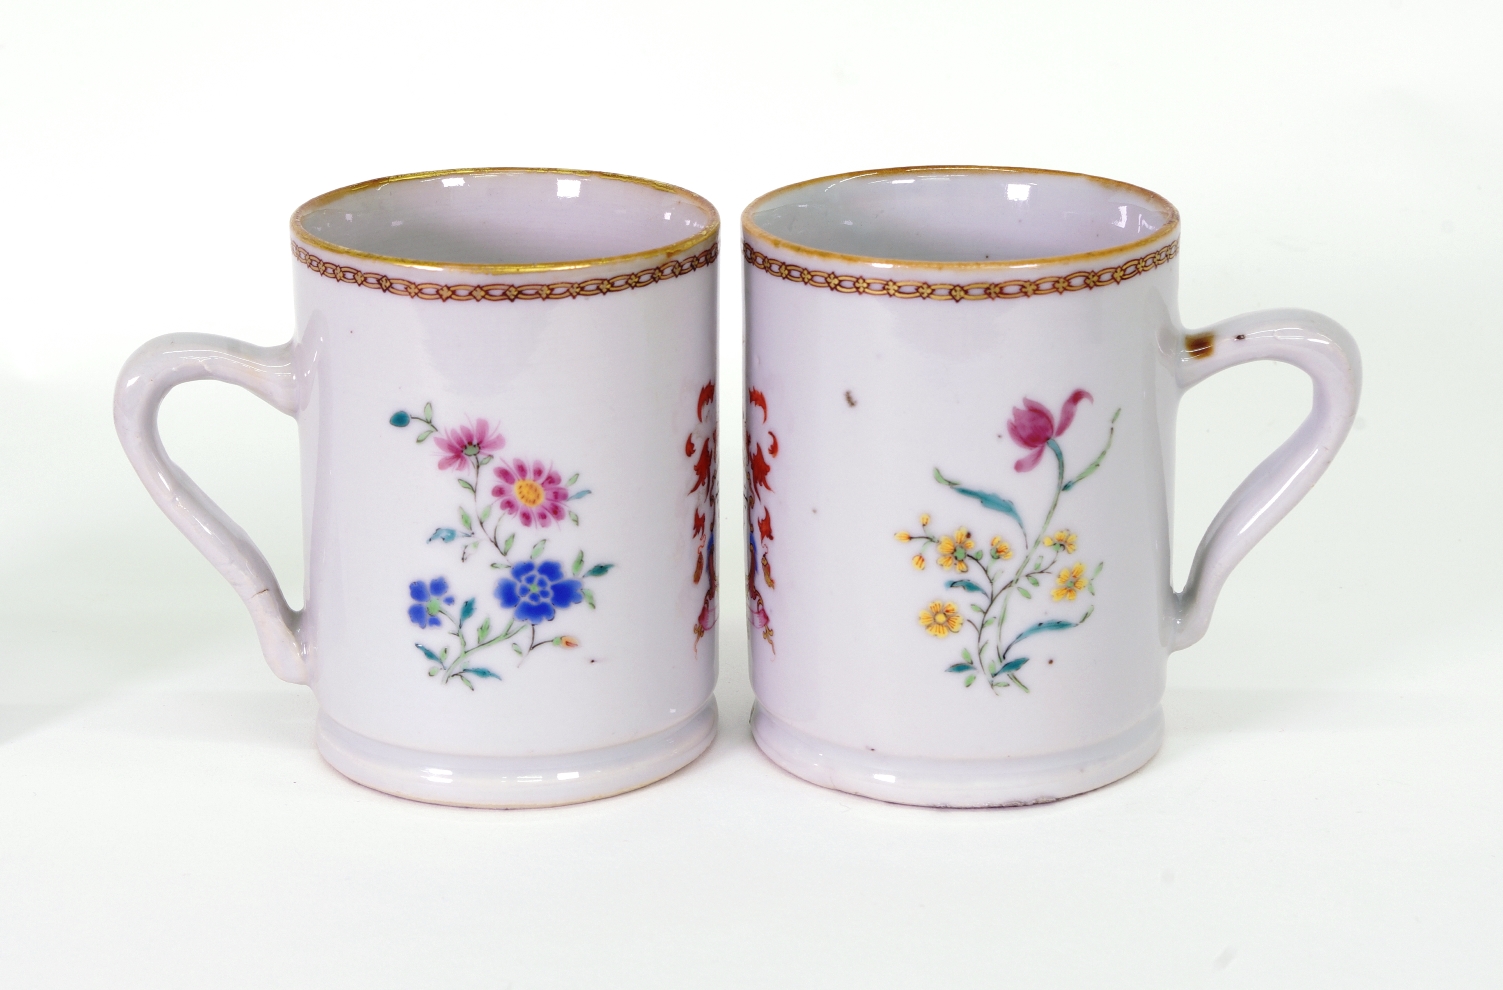 Pair of Chinese Export Armorial Small Mugs, c. 1750